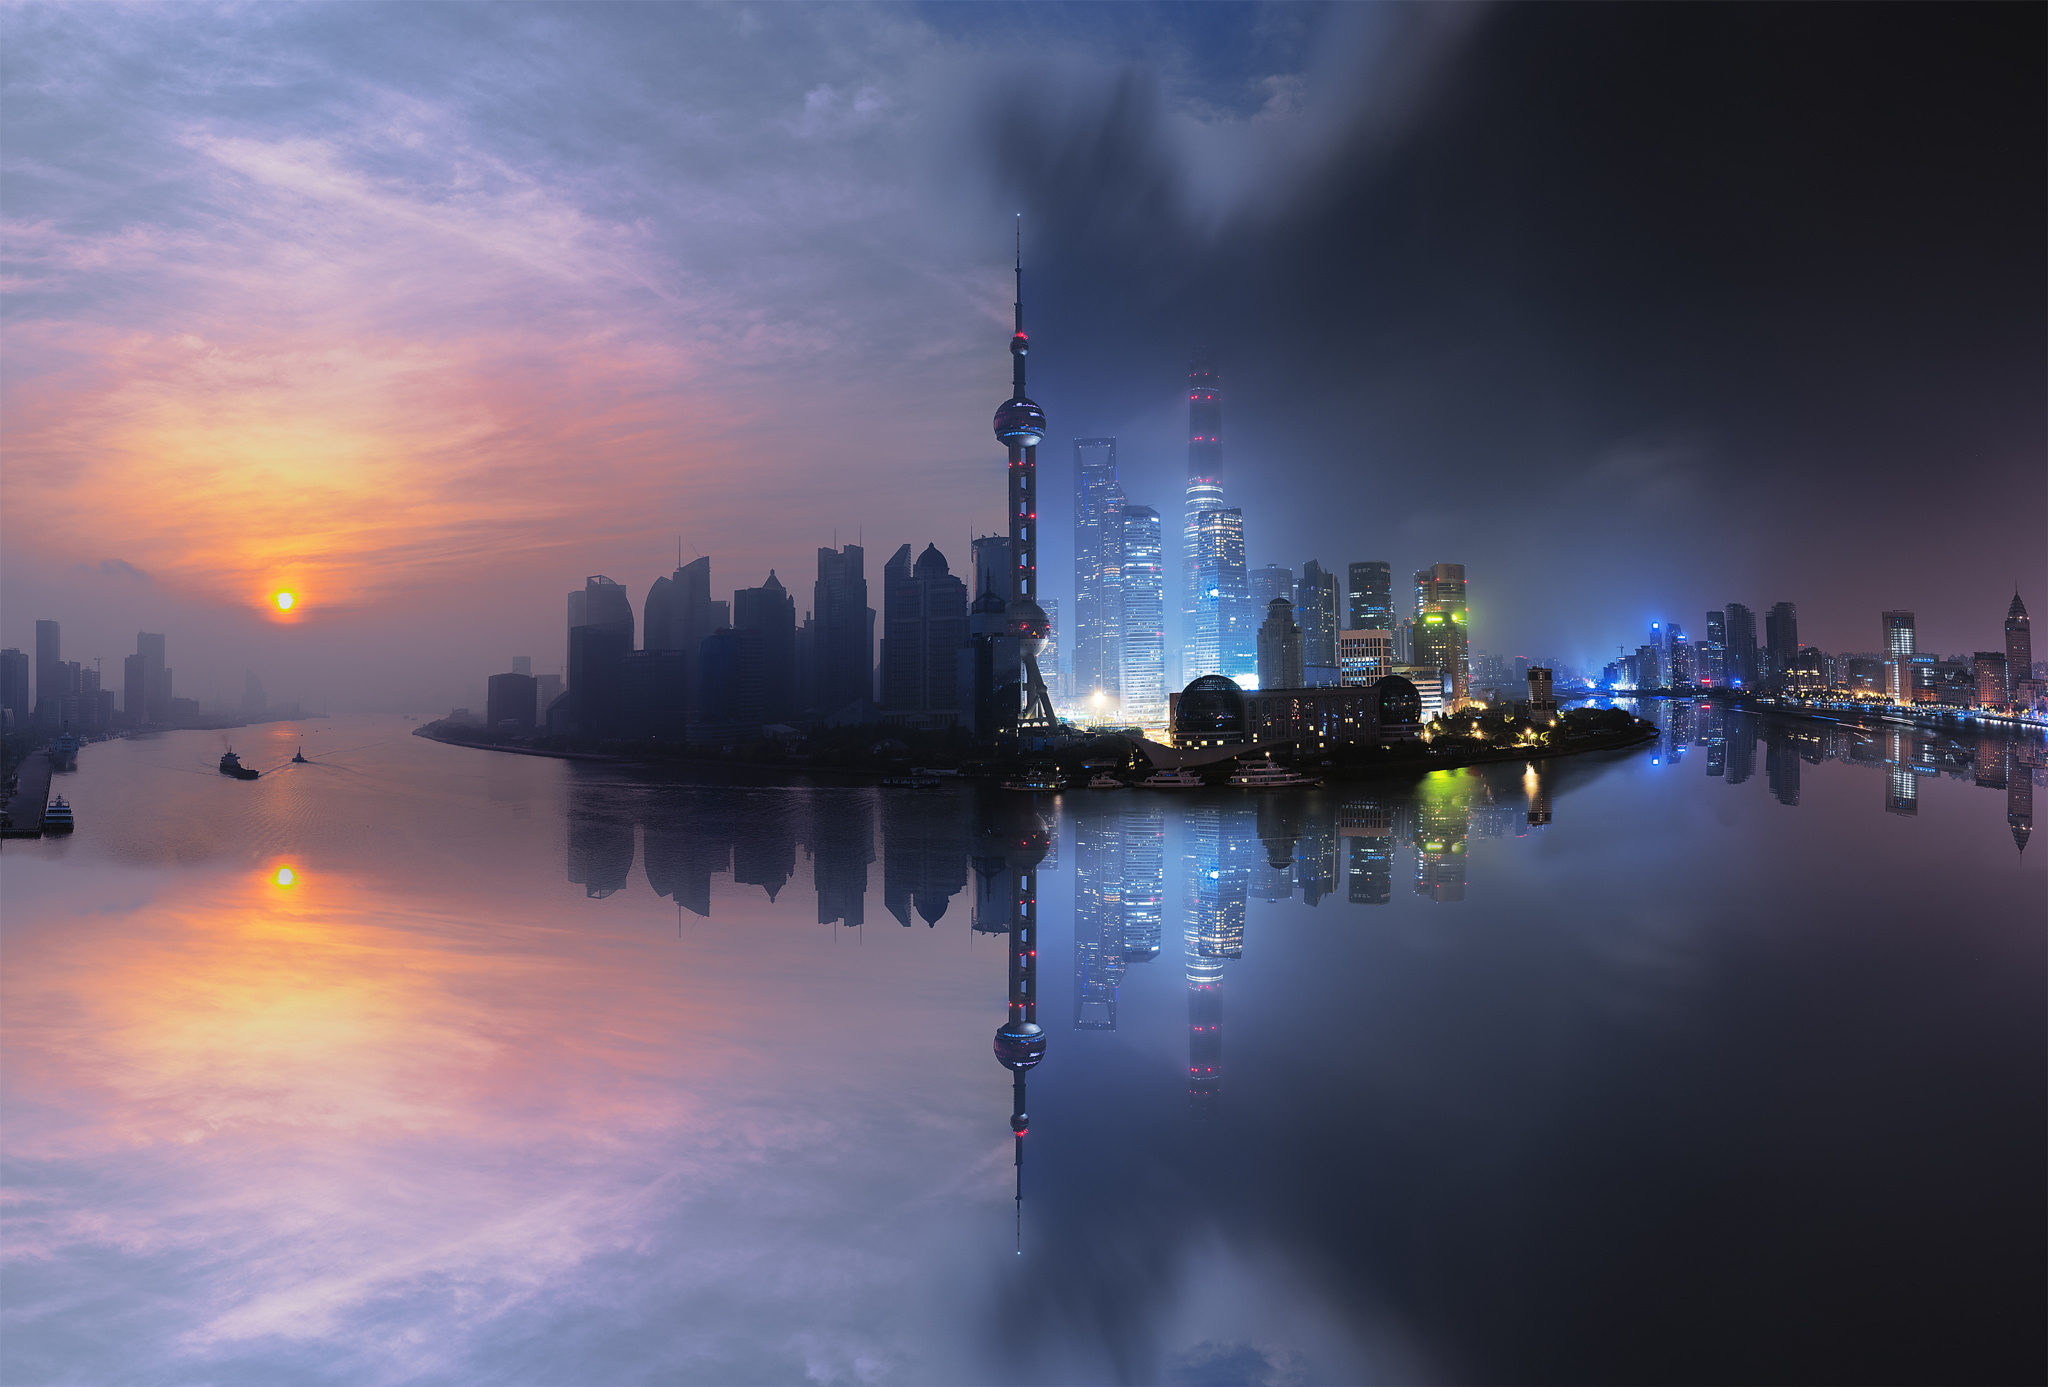 General 2048x1387 Shanghai night mist China cityscape building clouds nightscape reflection river sky city morning Asia Sun water 500px low light